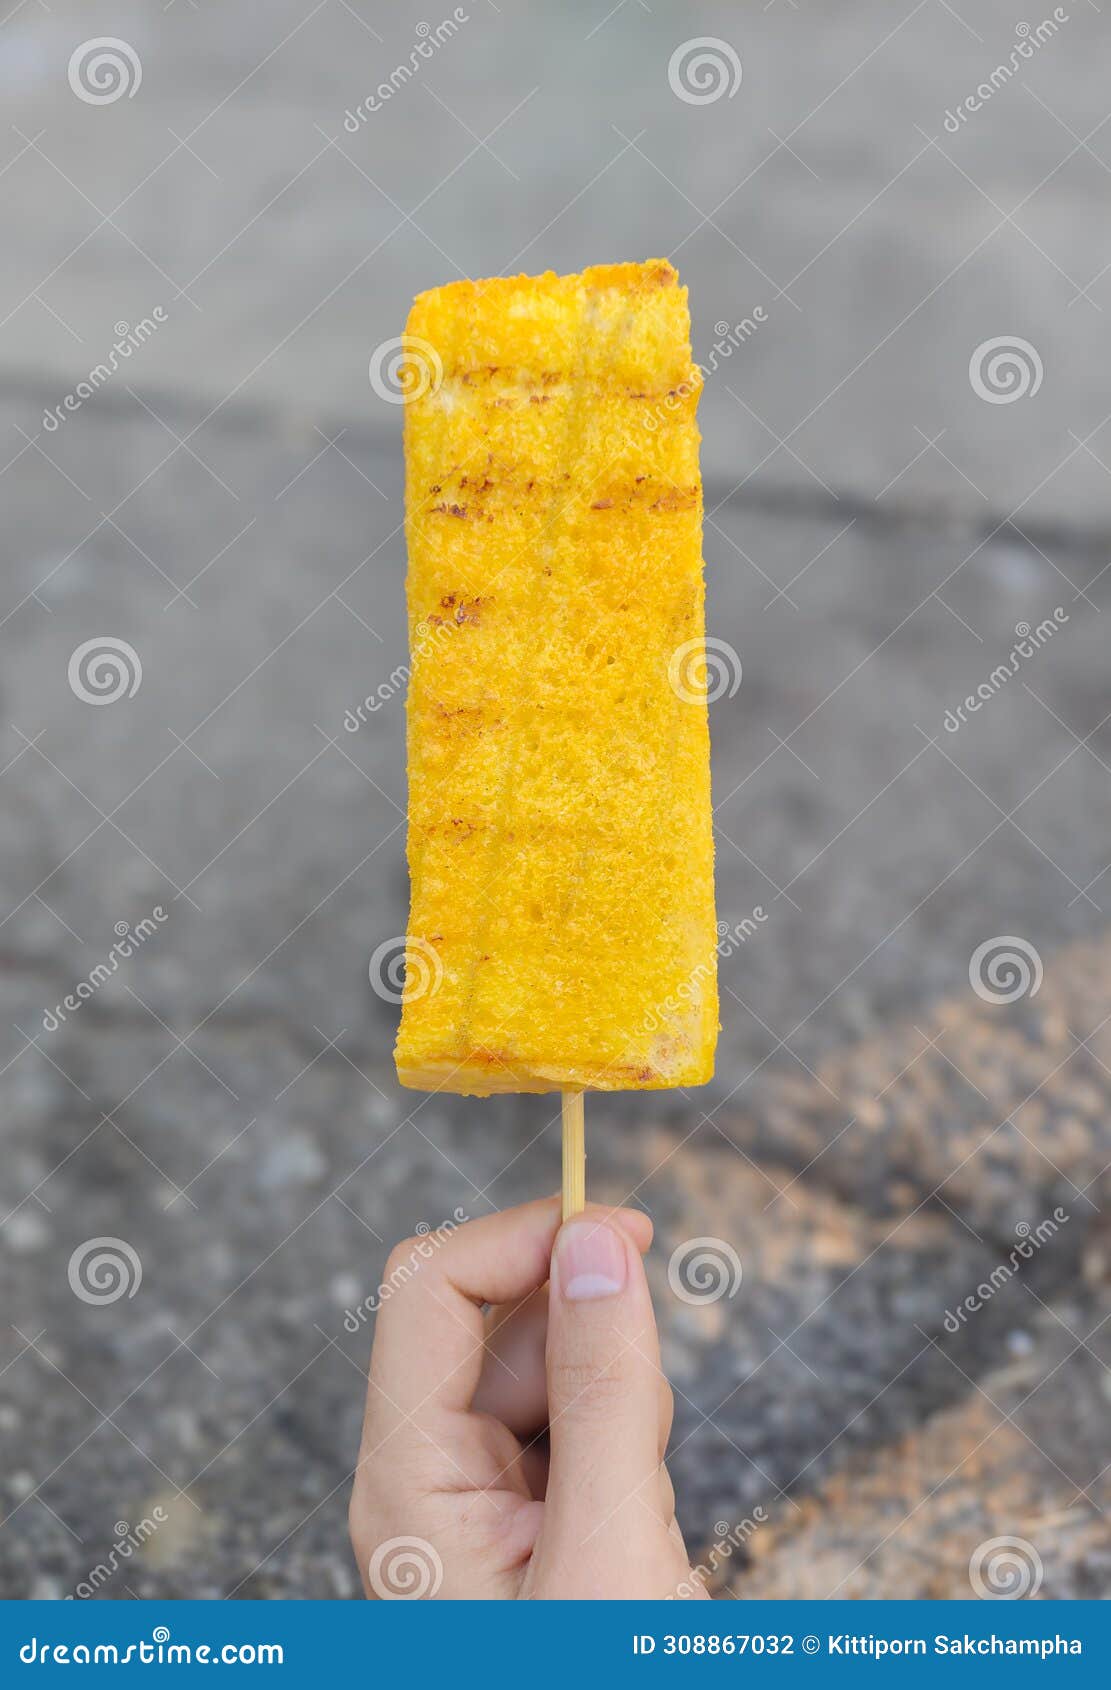 hand holding bread or yellow toast with slight burn marks on a wooden skewer on a vertical blurred gray